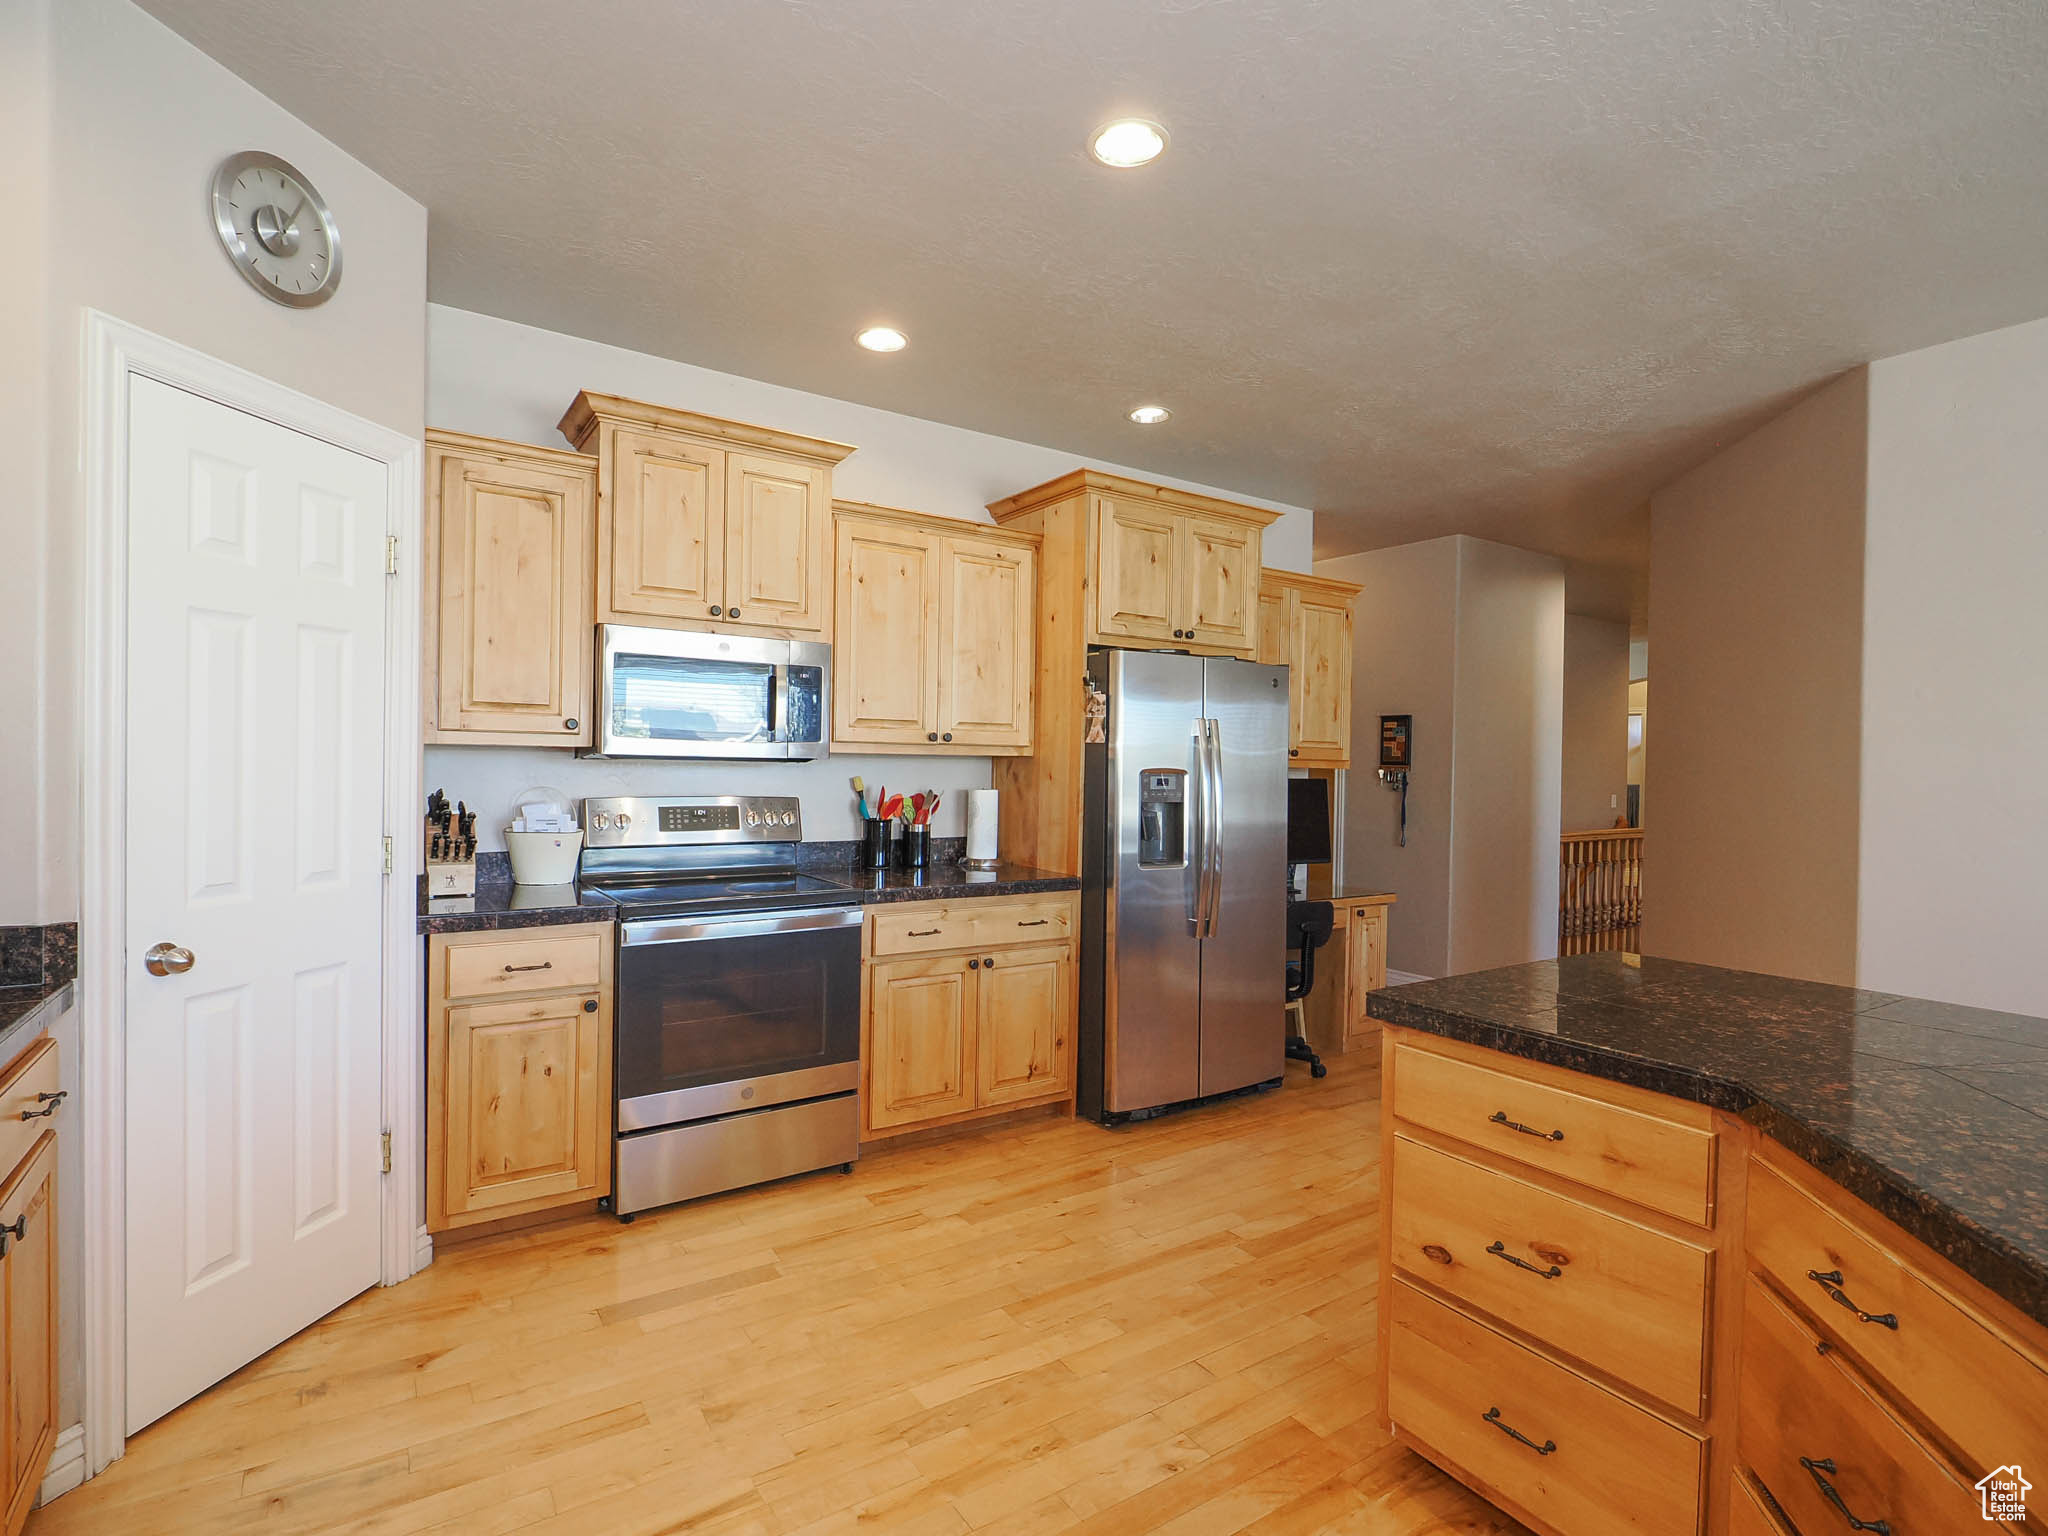 Kitchen featuring  appliances with stainless steel finishes, and light hardwood flooring